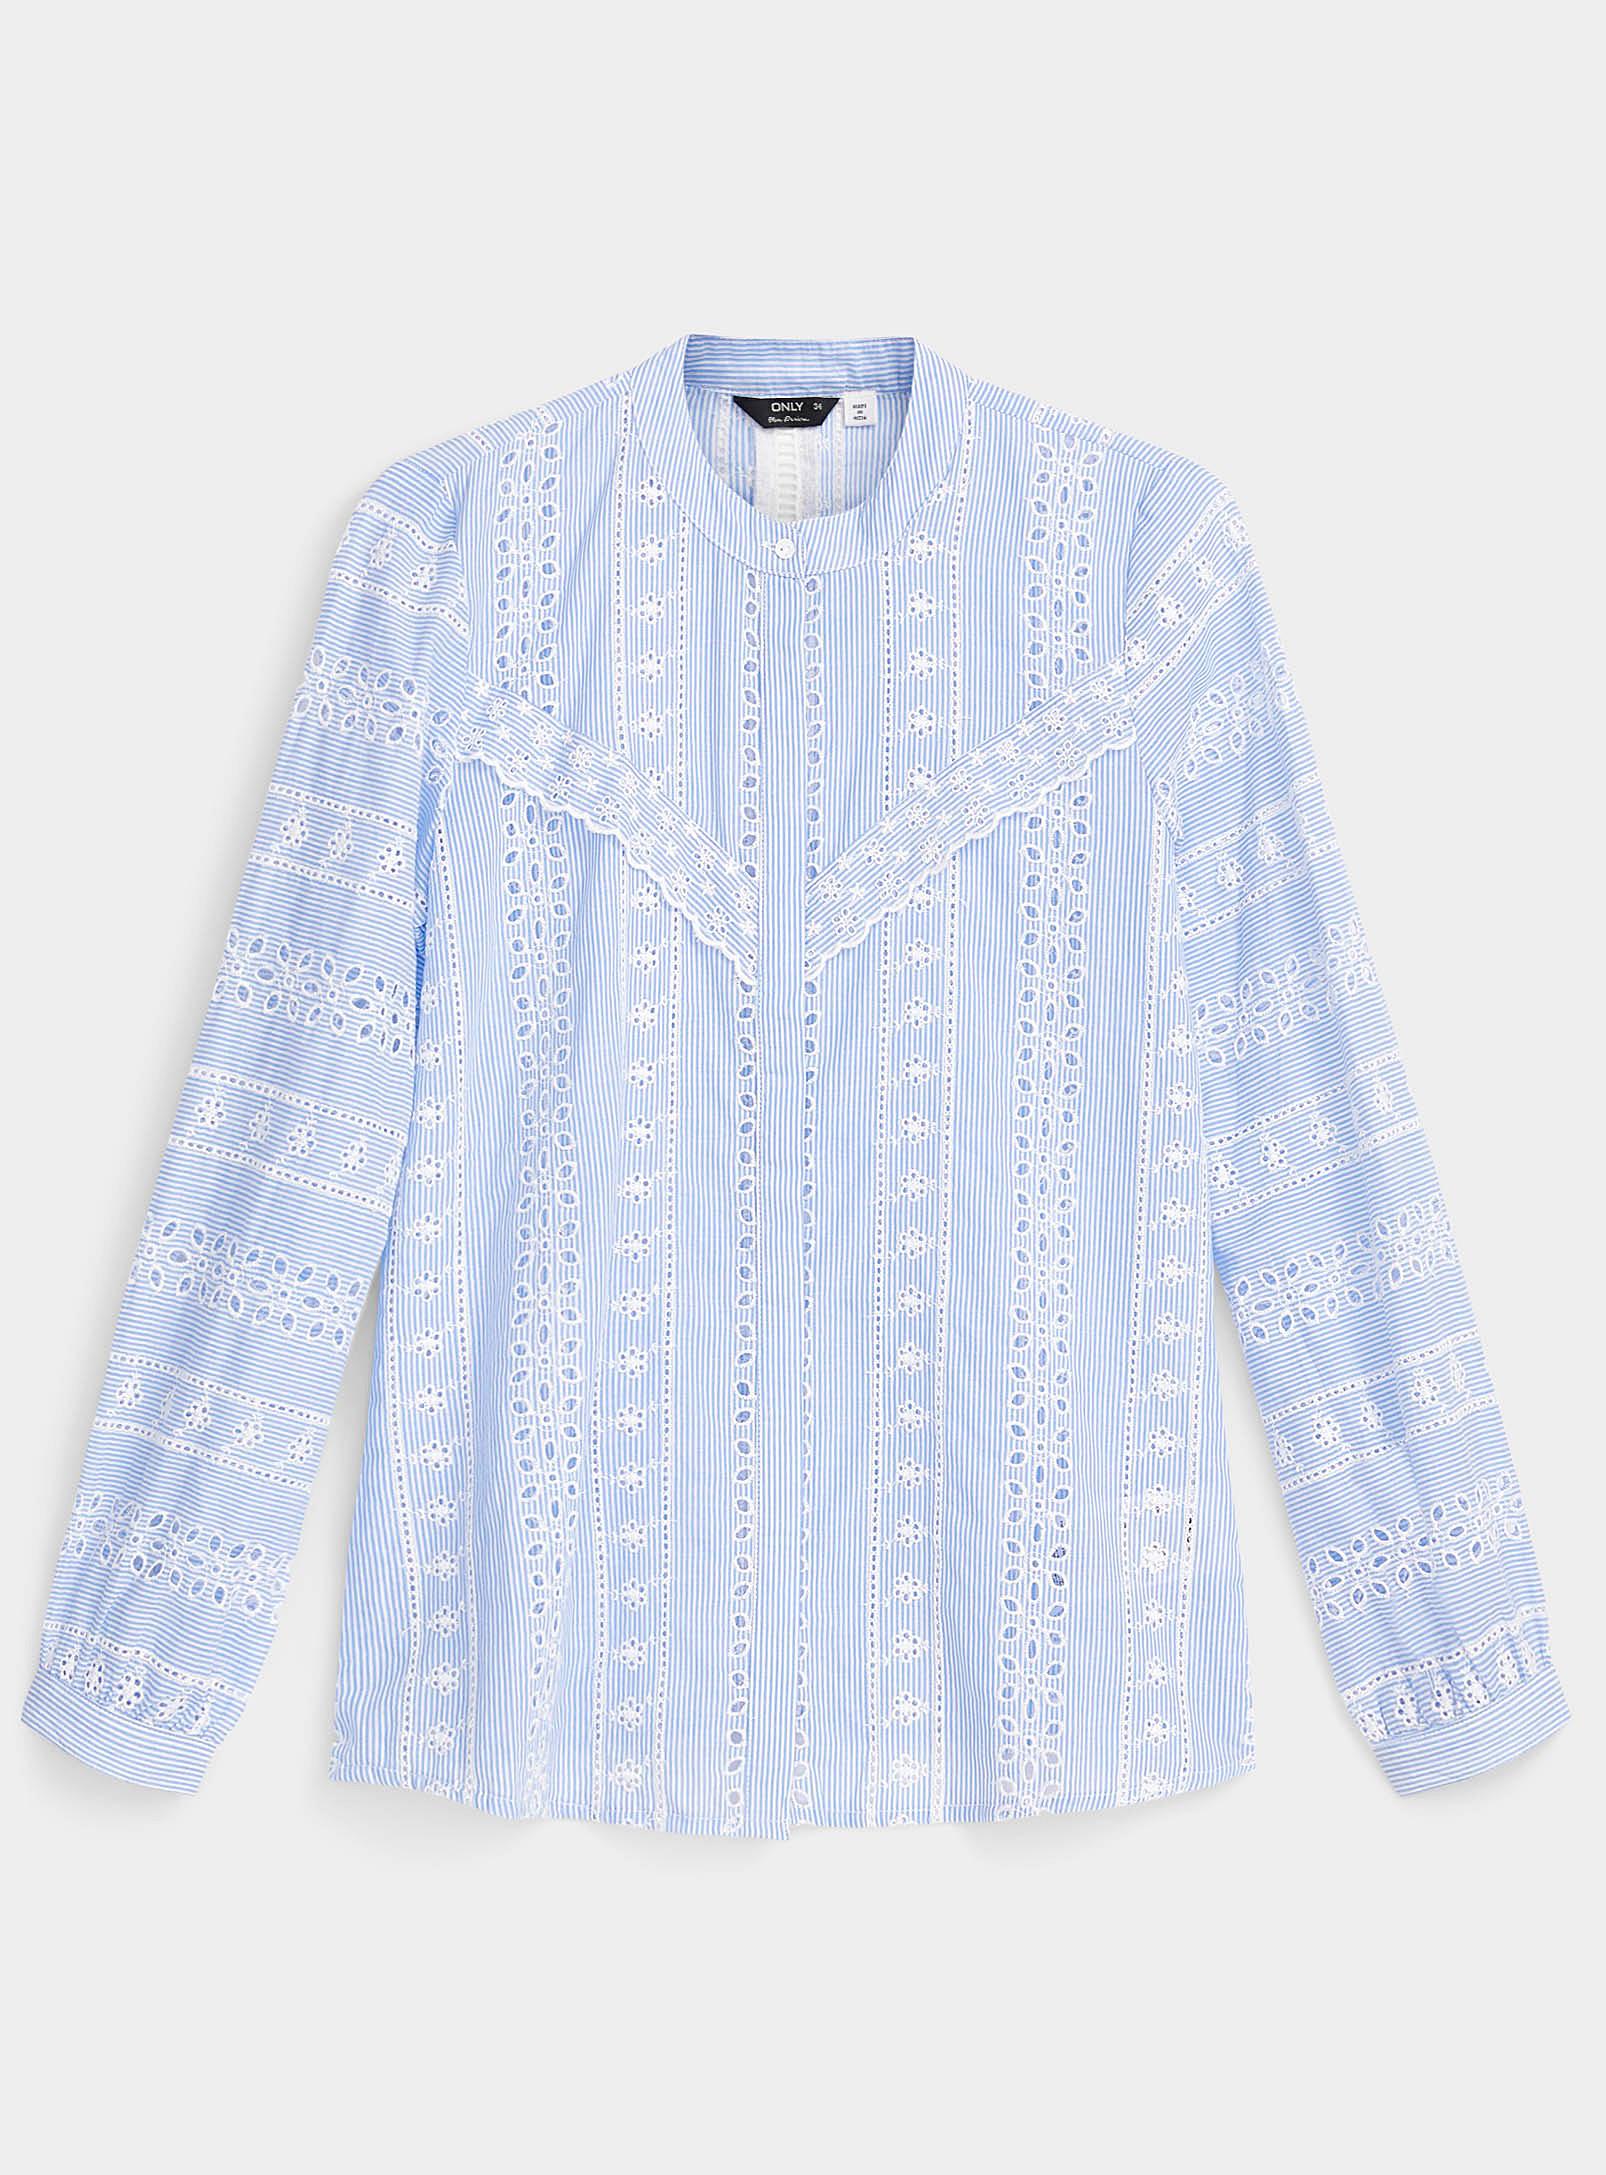 ONLY Cotton Broderie Anglaise Shirt in Baby Blue (Blue) - Lyst